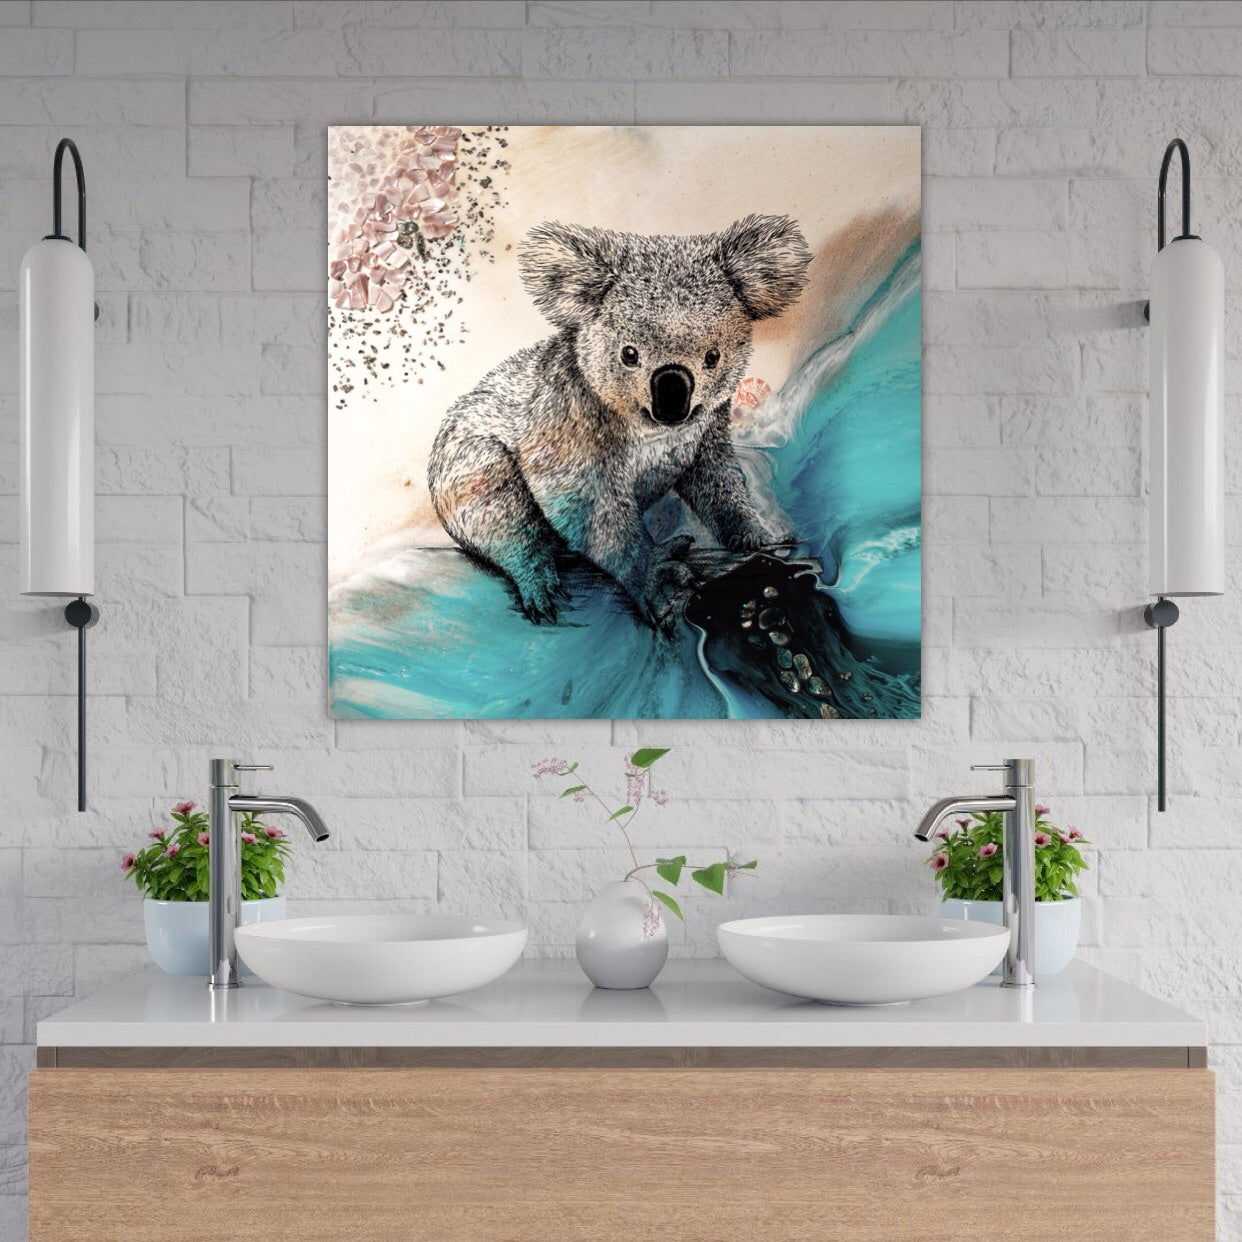 Abstract Ocean. Blue beach with Koala. Art Print. Antuanelle 3 Print for WWF Koala Conservation. Limited Edition